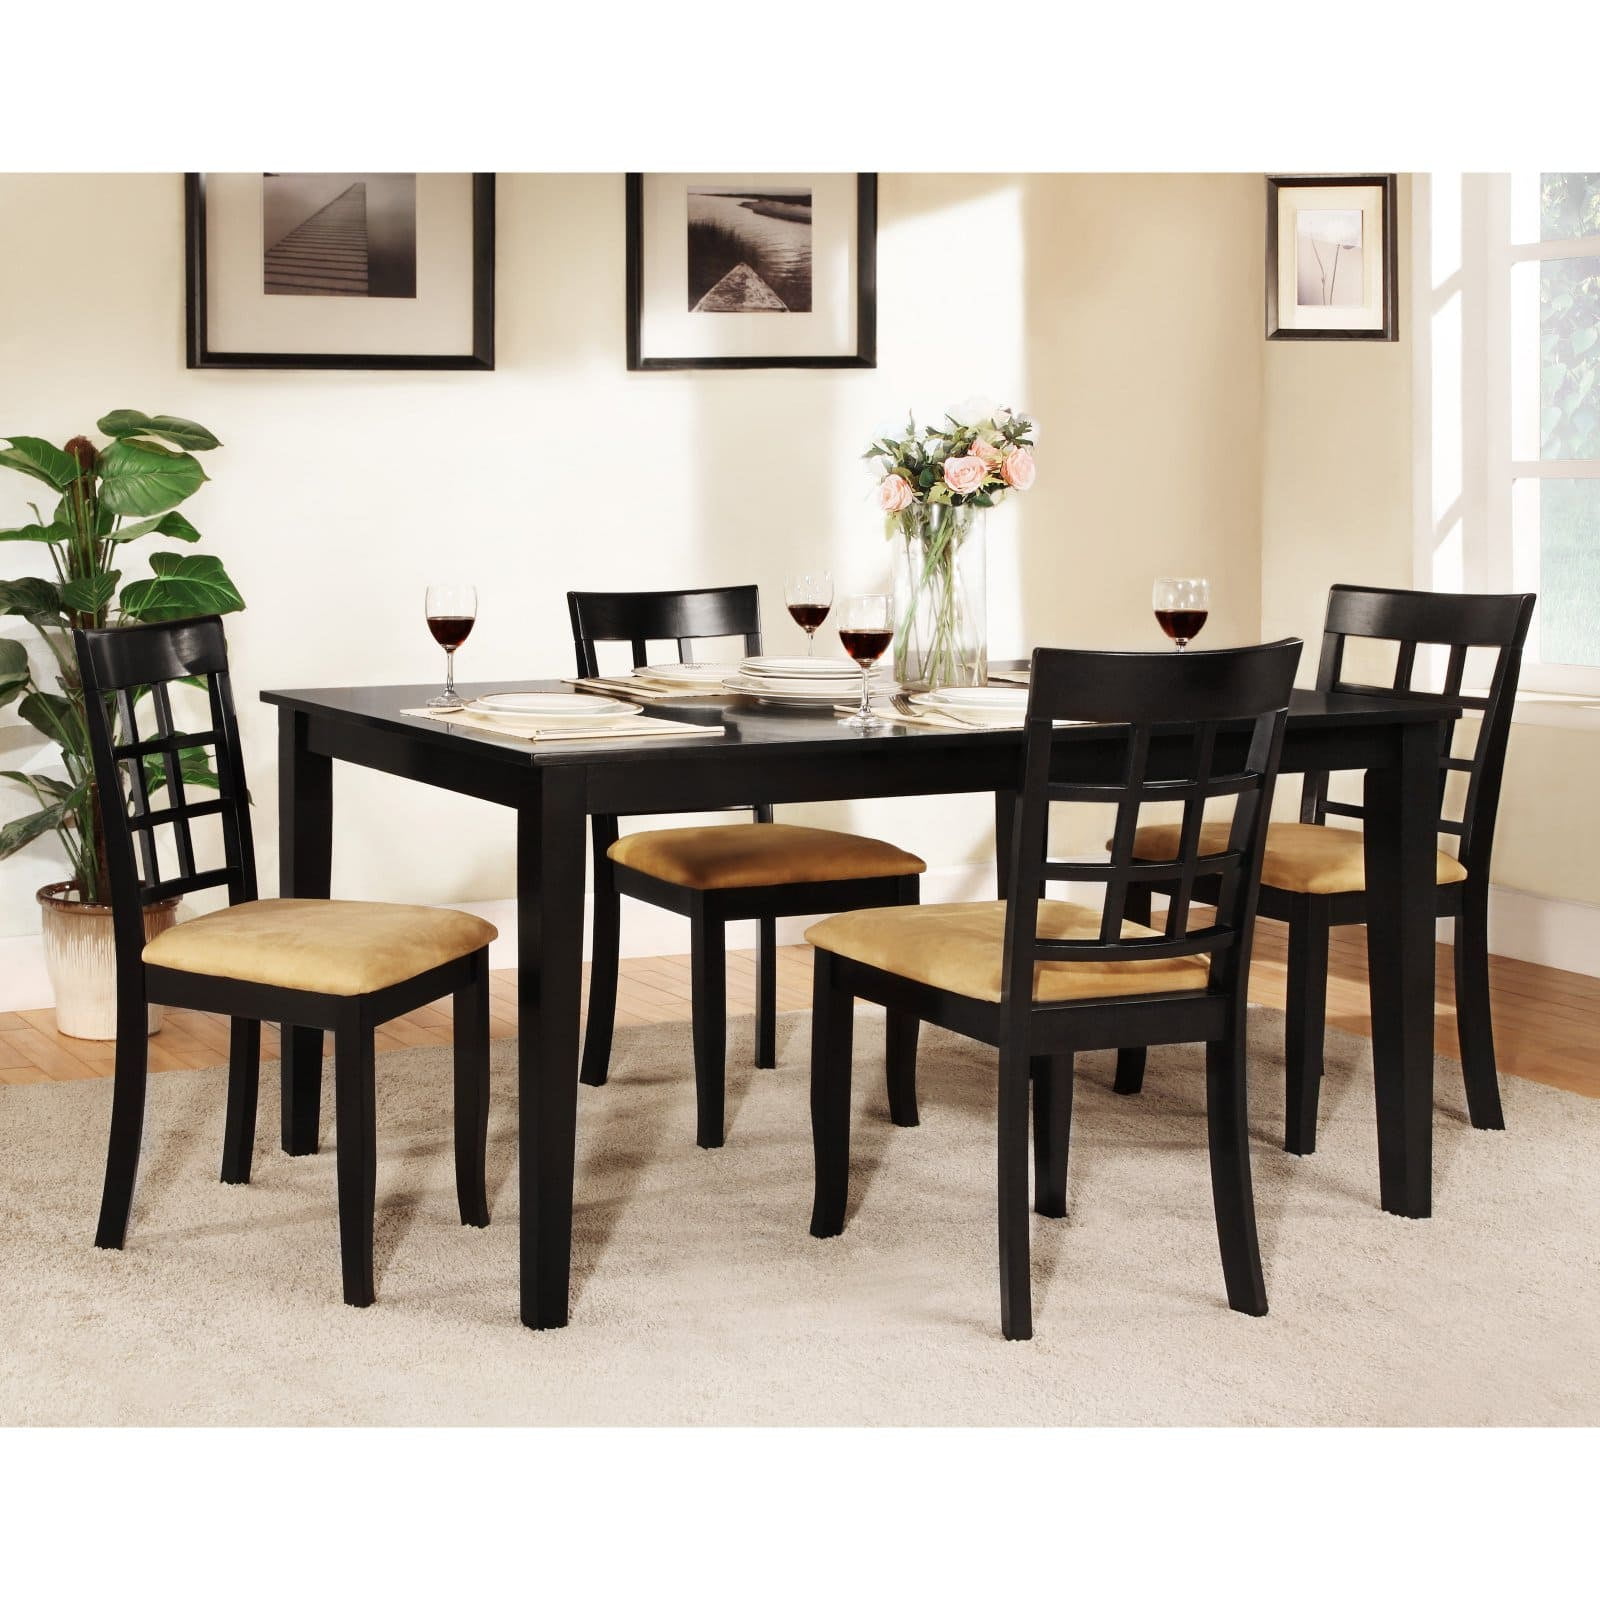 Homelegance Tibalt 5 pc. Rectangle Black Dining Table Set - 60 in. with